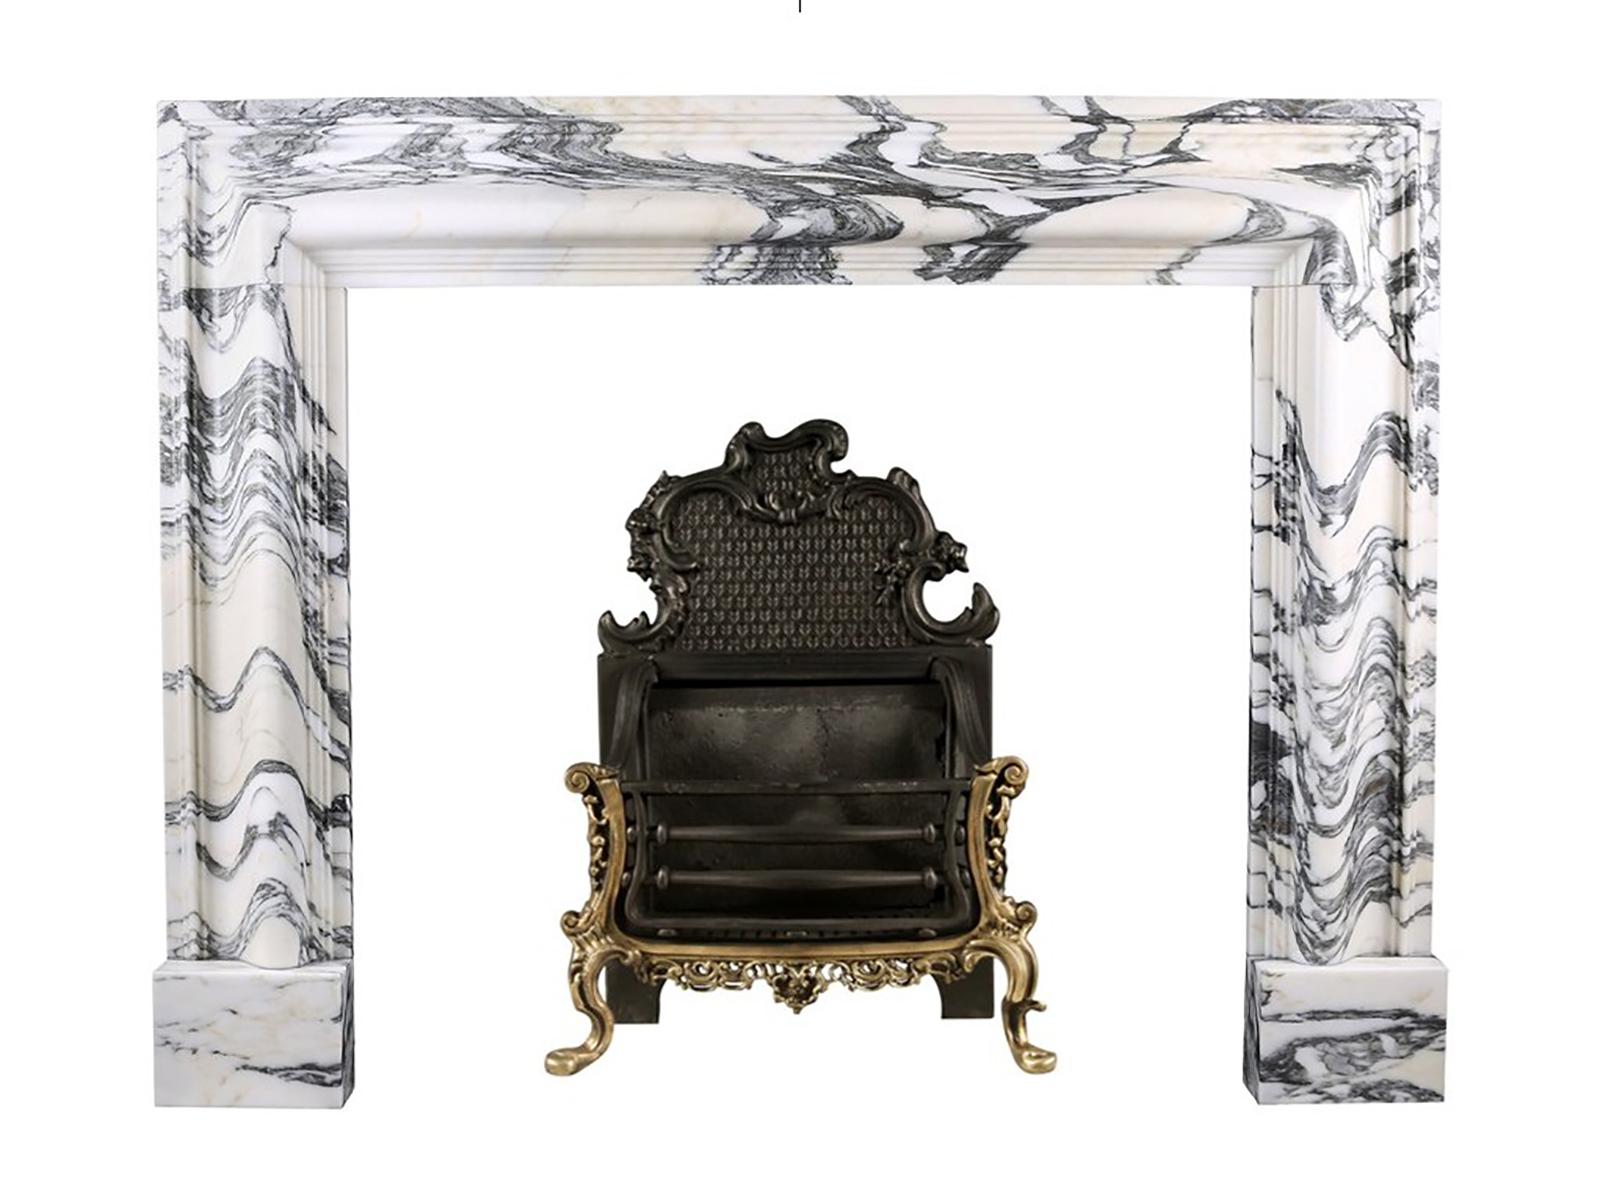 A Baroque Bolection Fireplace in Italian Arabescato marble fireplace

A Baroque style Bolection Fireplace surround of bold proportions with very finely carved columns with a rising ogee edging, which are supported on substantial footblocks, in